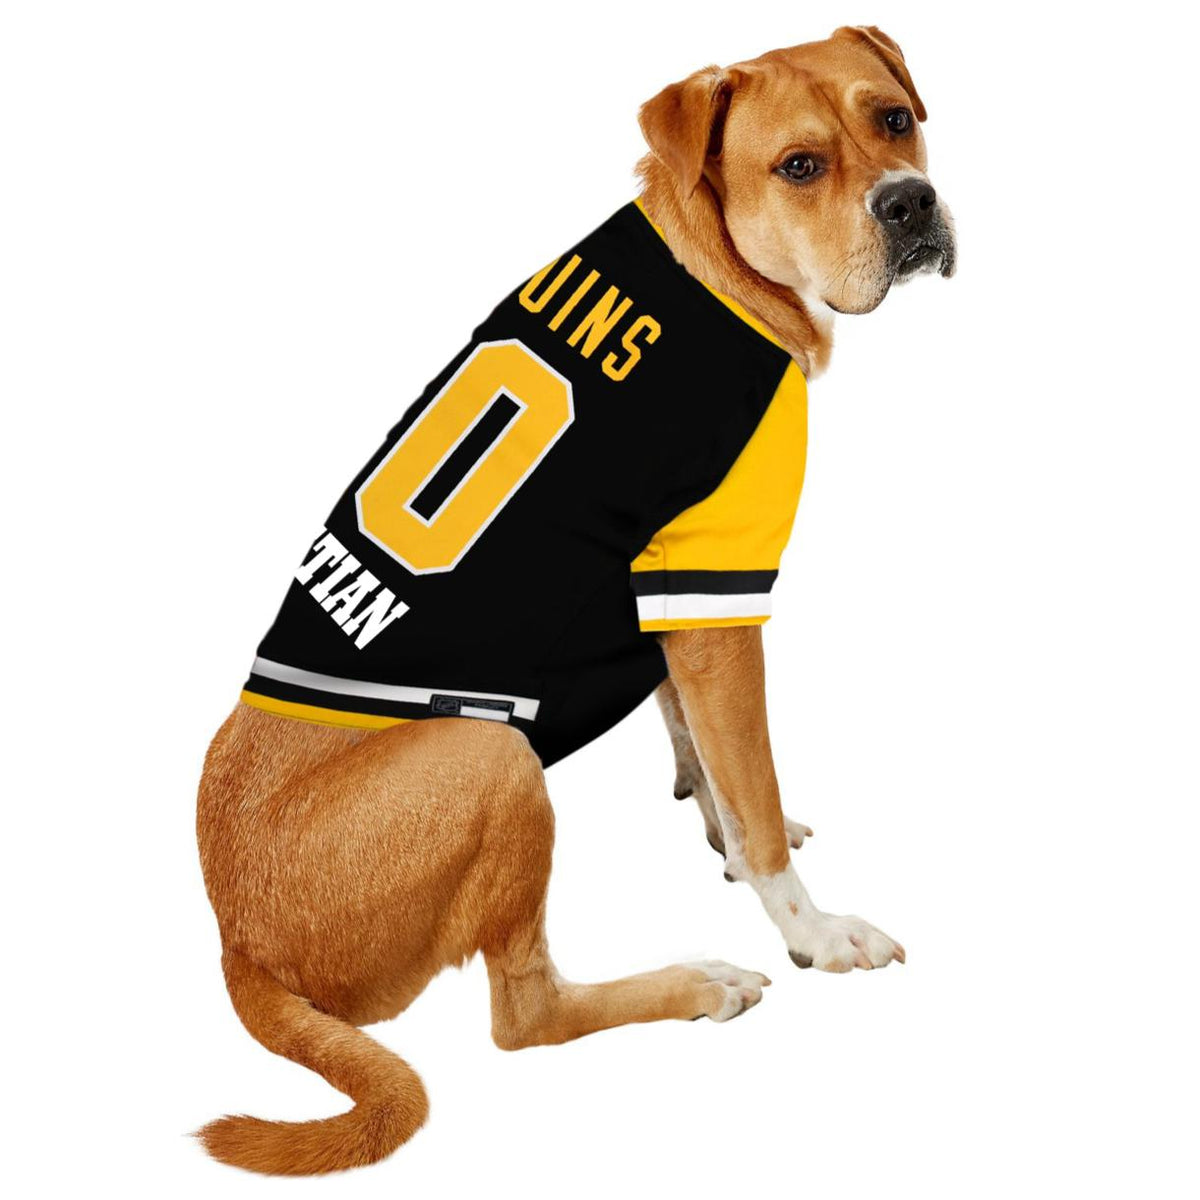 steelers dog clothes